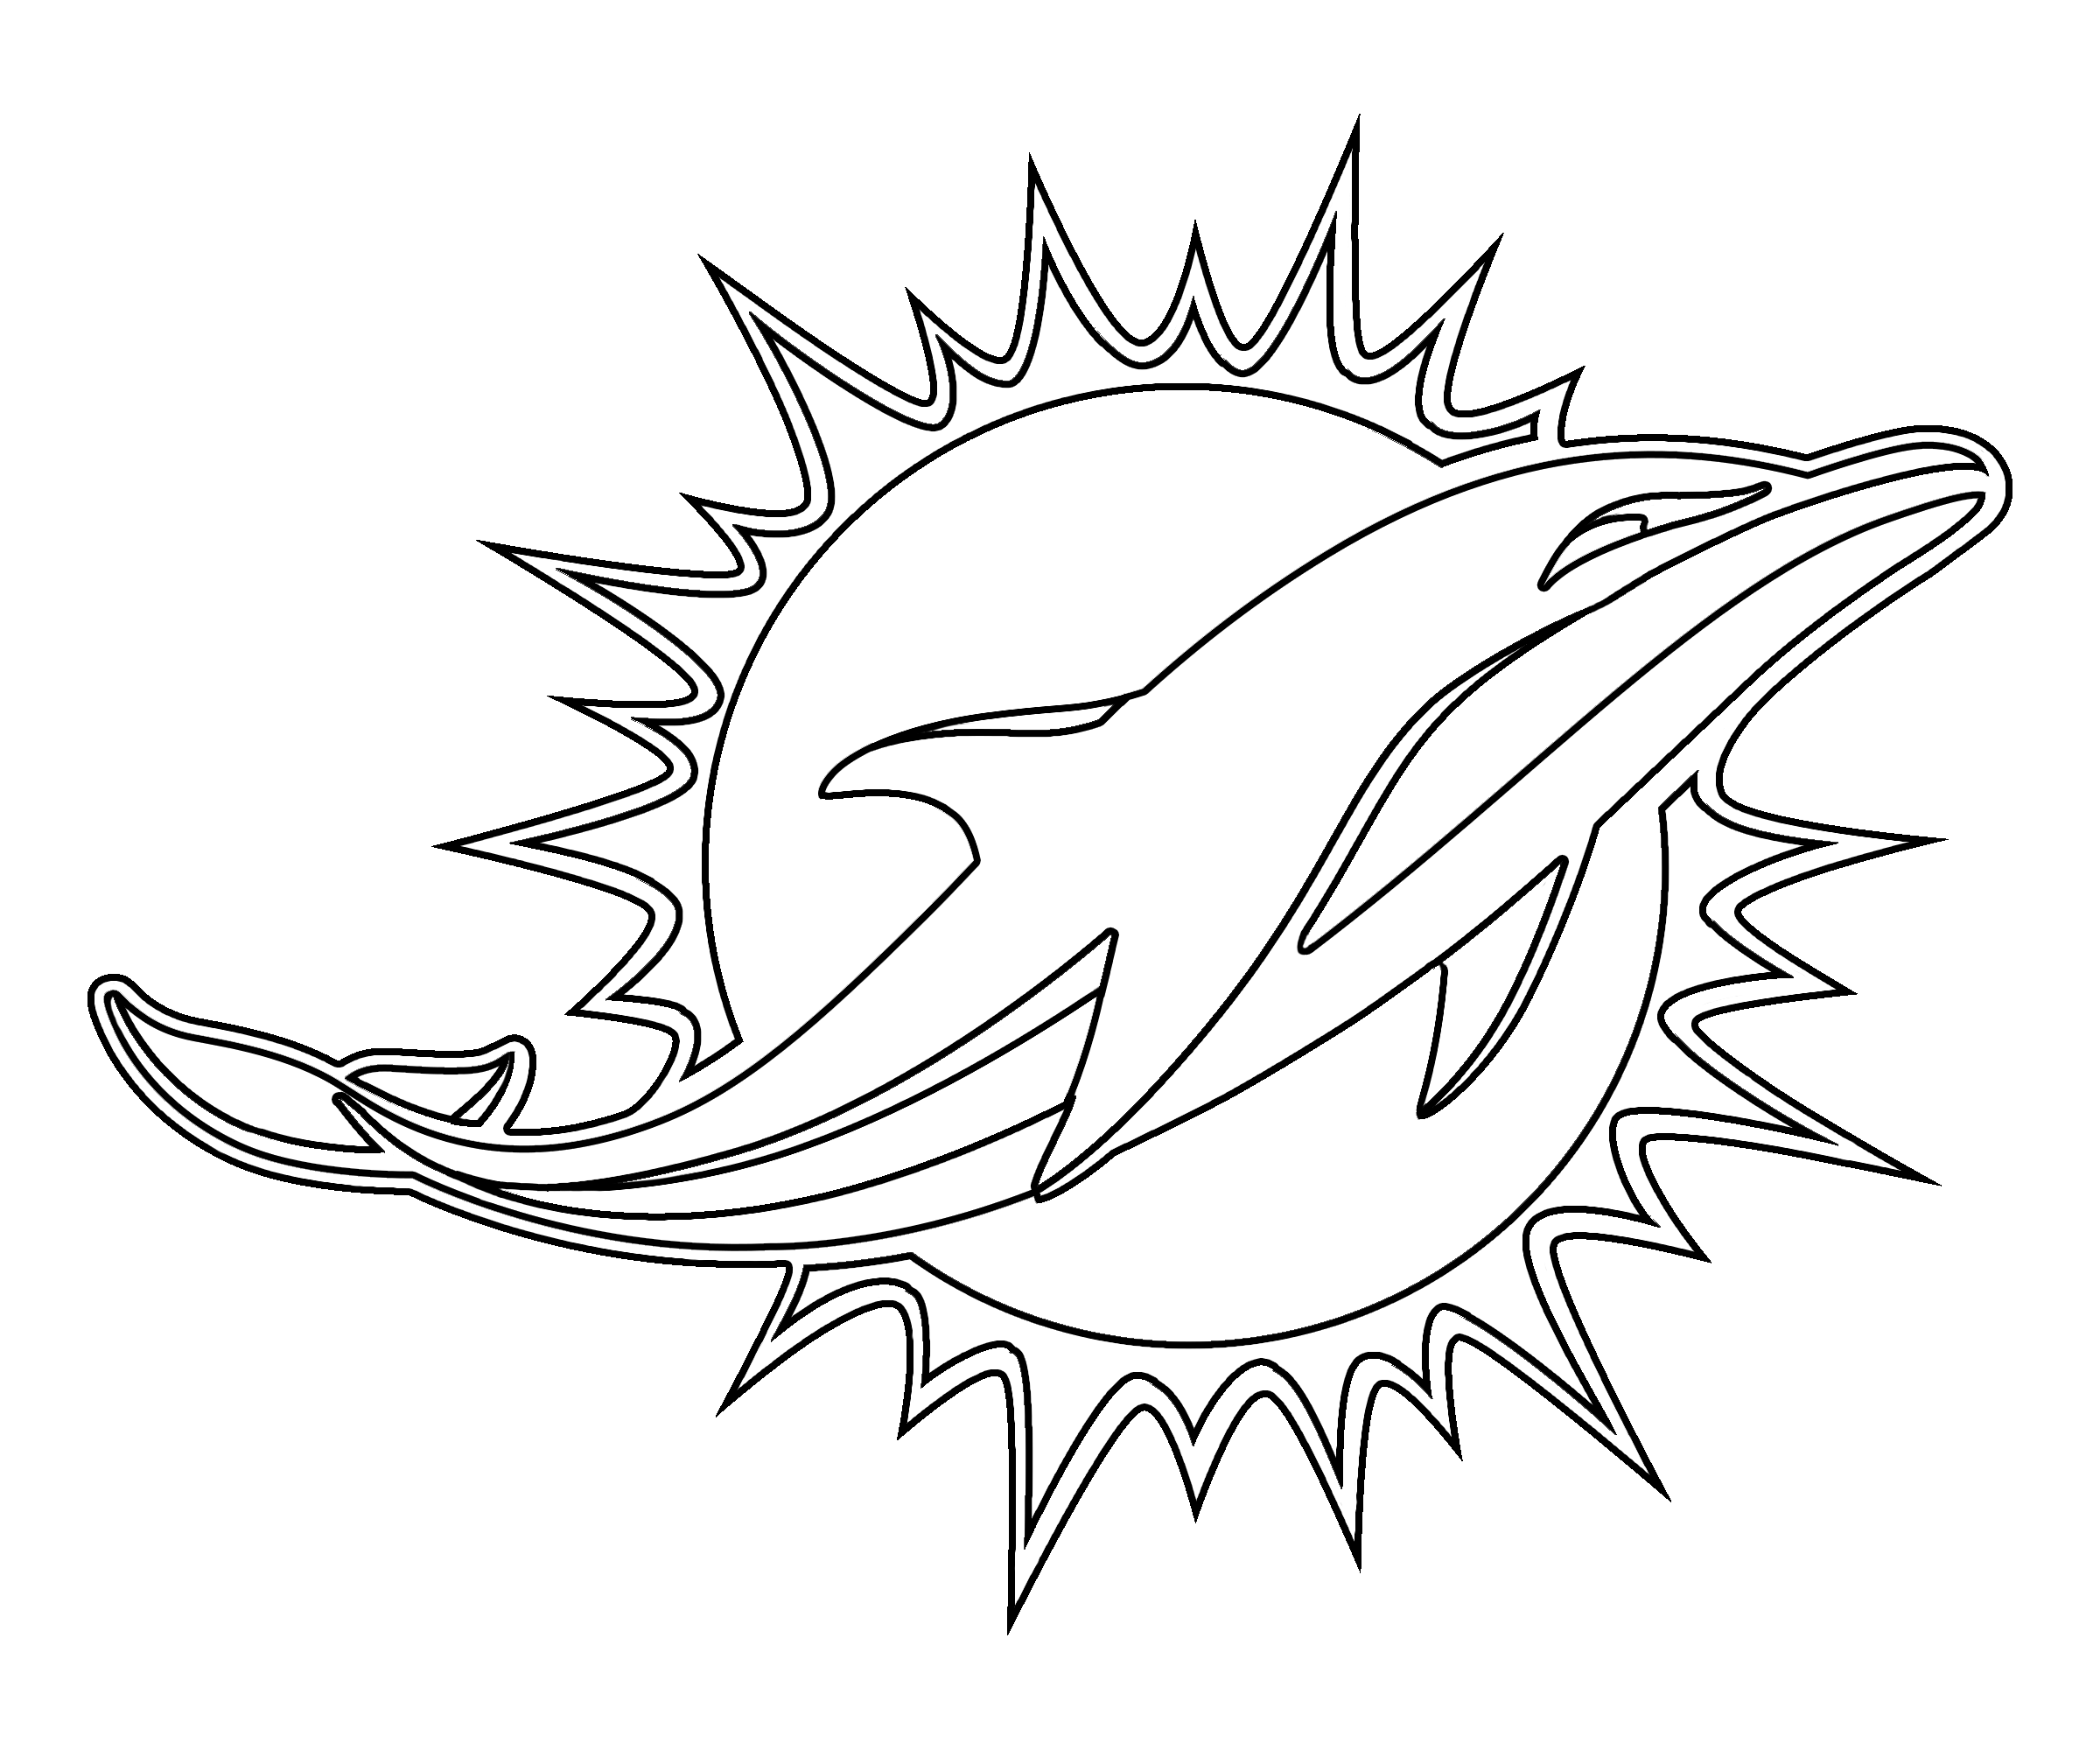 Miami Dolphins Logo - Miami Dolphins Logo PNG Transparent & SVG Vector - Freebie Supply